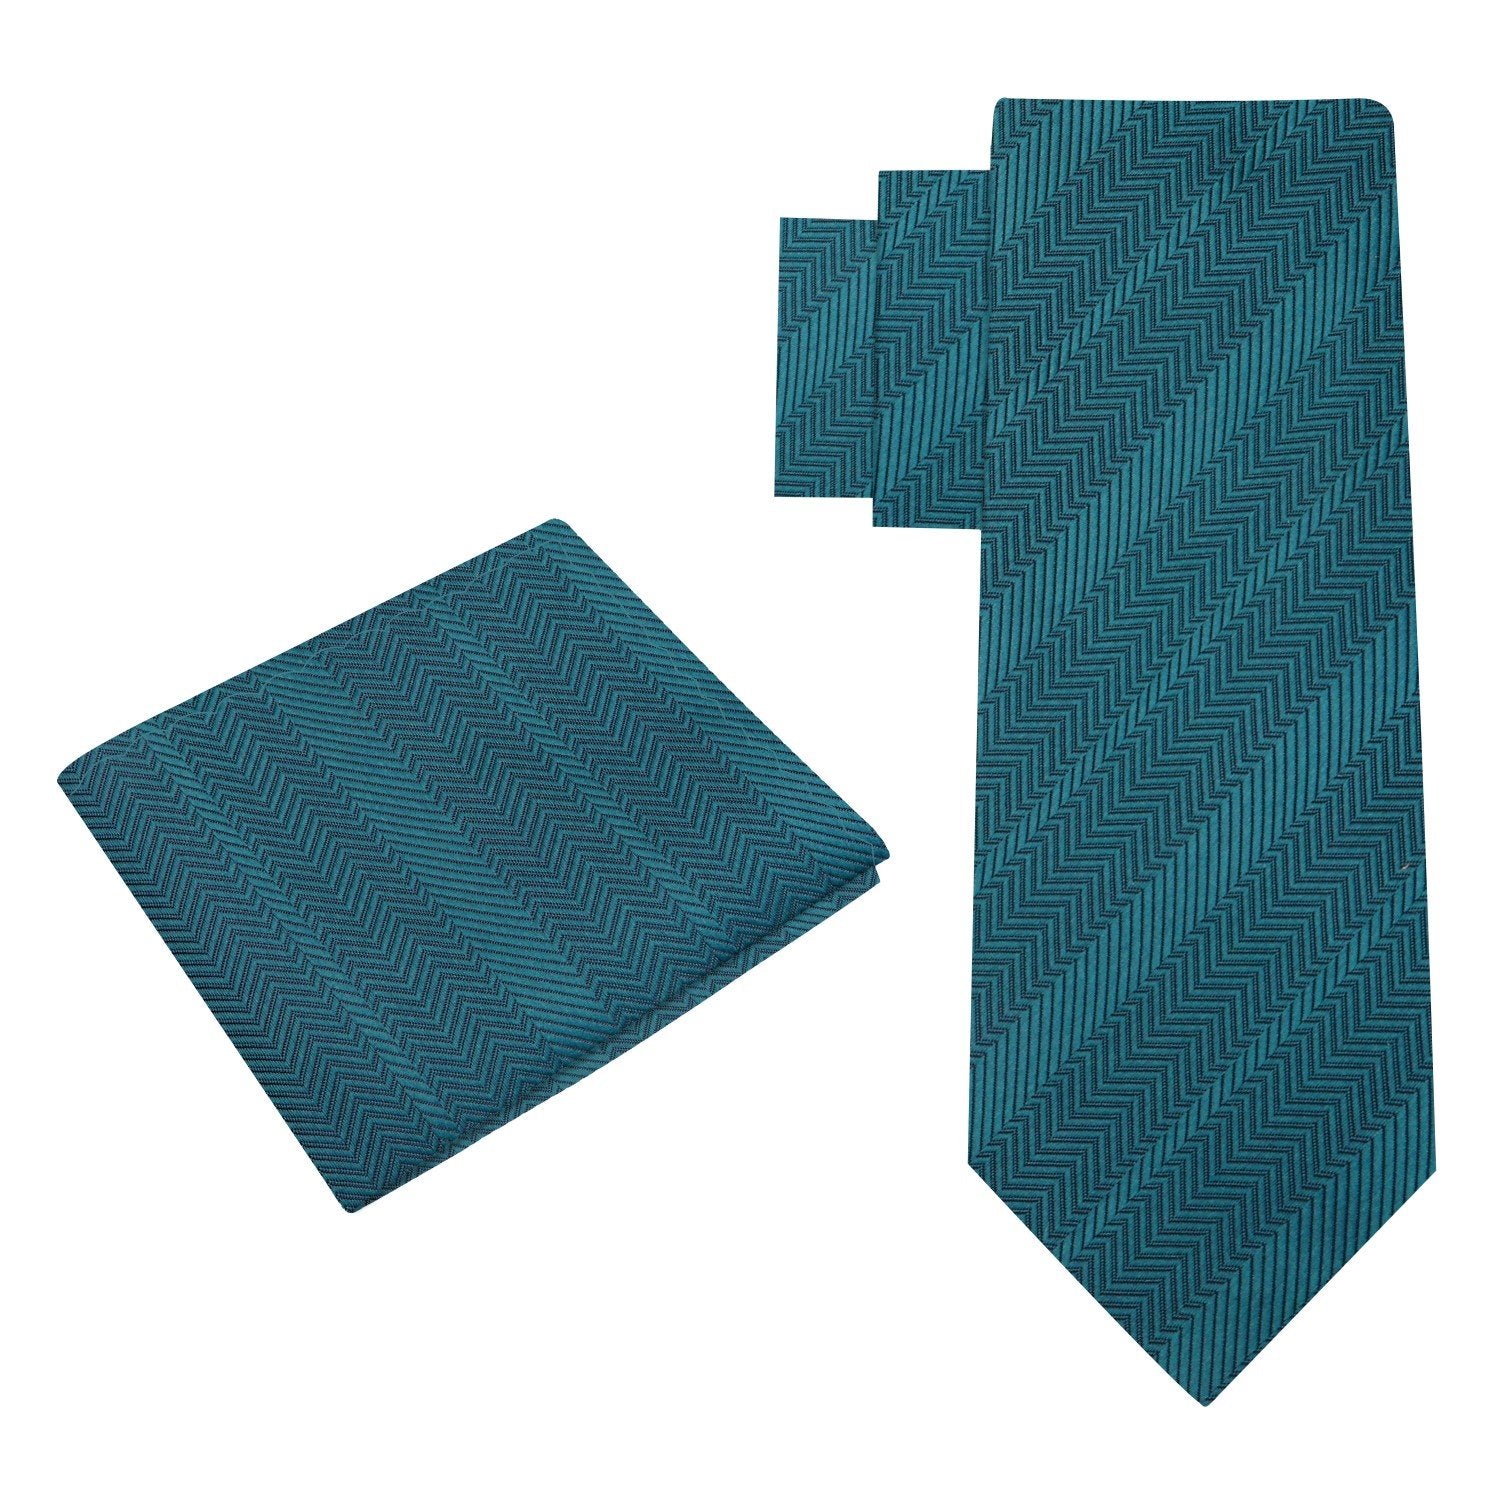 Alt View: Deep Pine Green Tie and Square